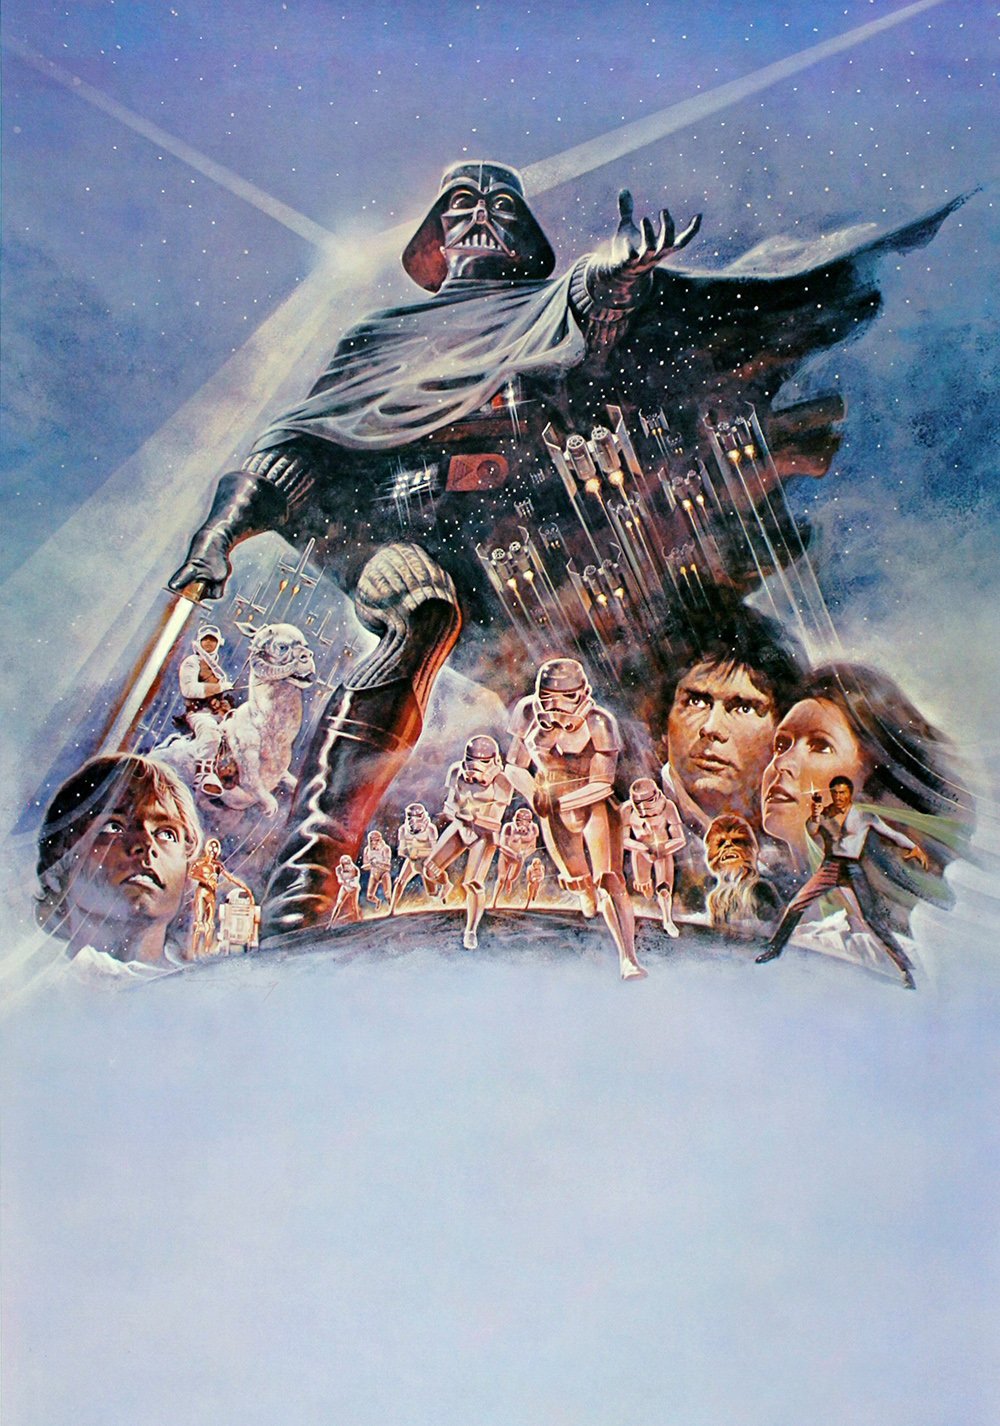 Star Wars Episode V The Empire Strikes Back Movie Poster Id 125291 Image Abyss